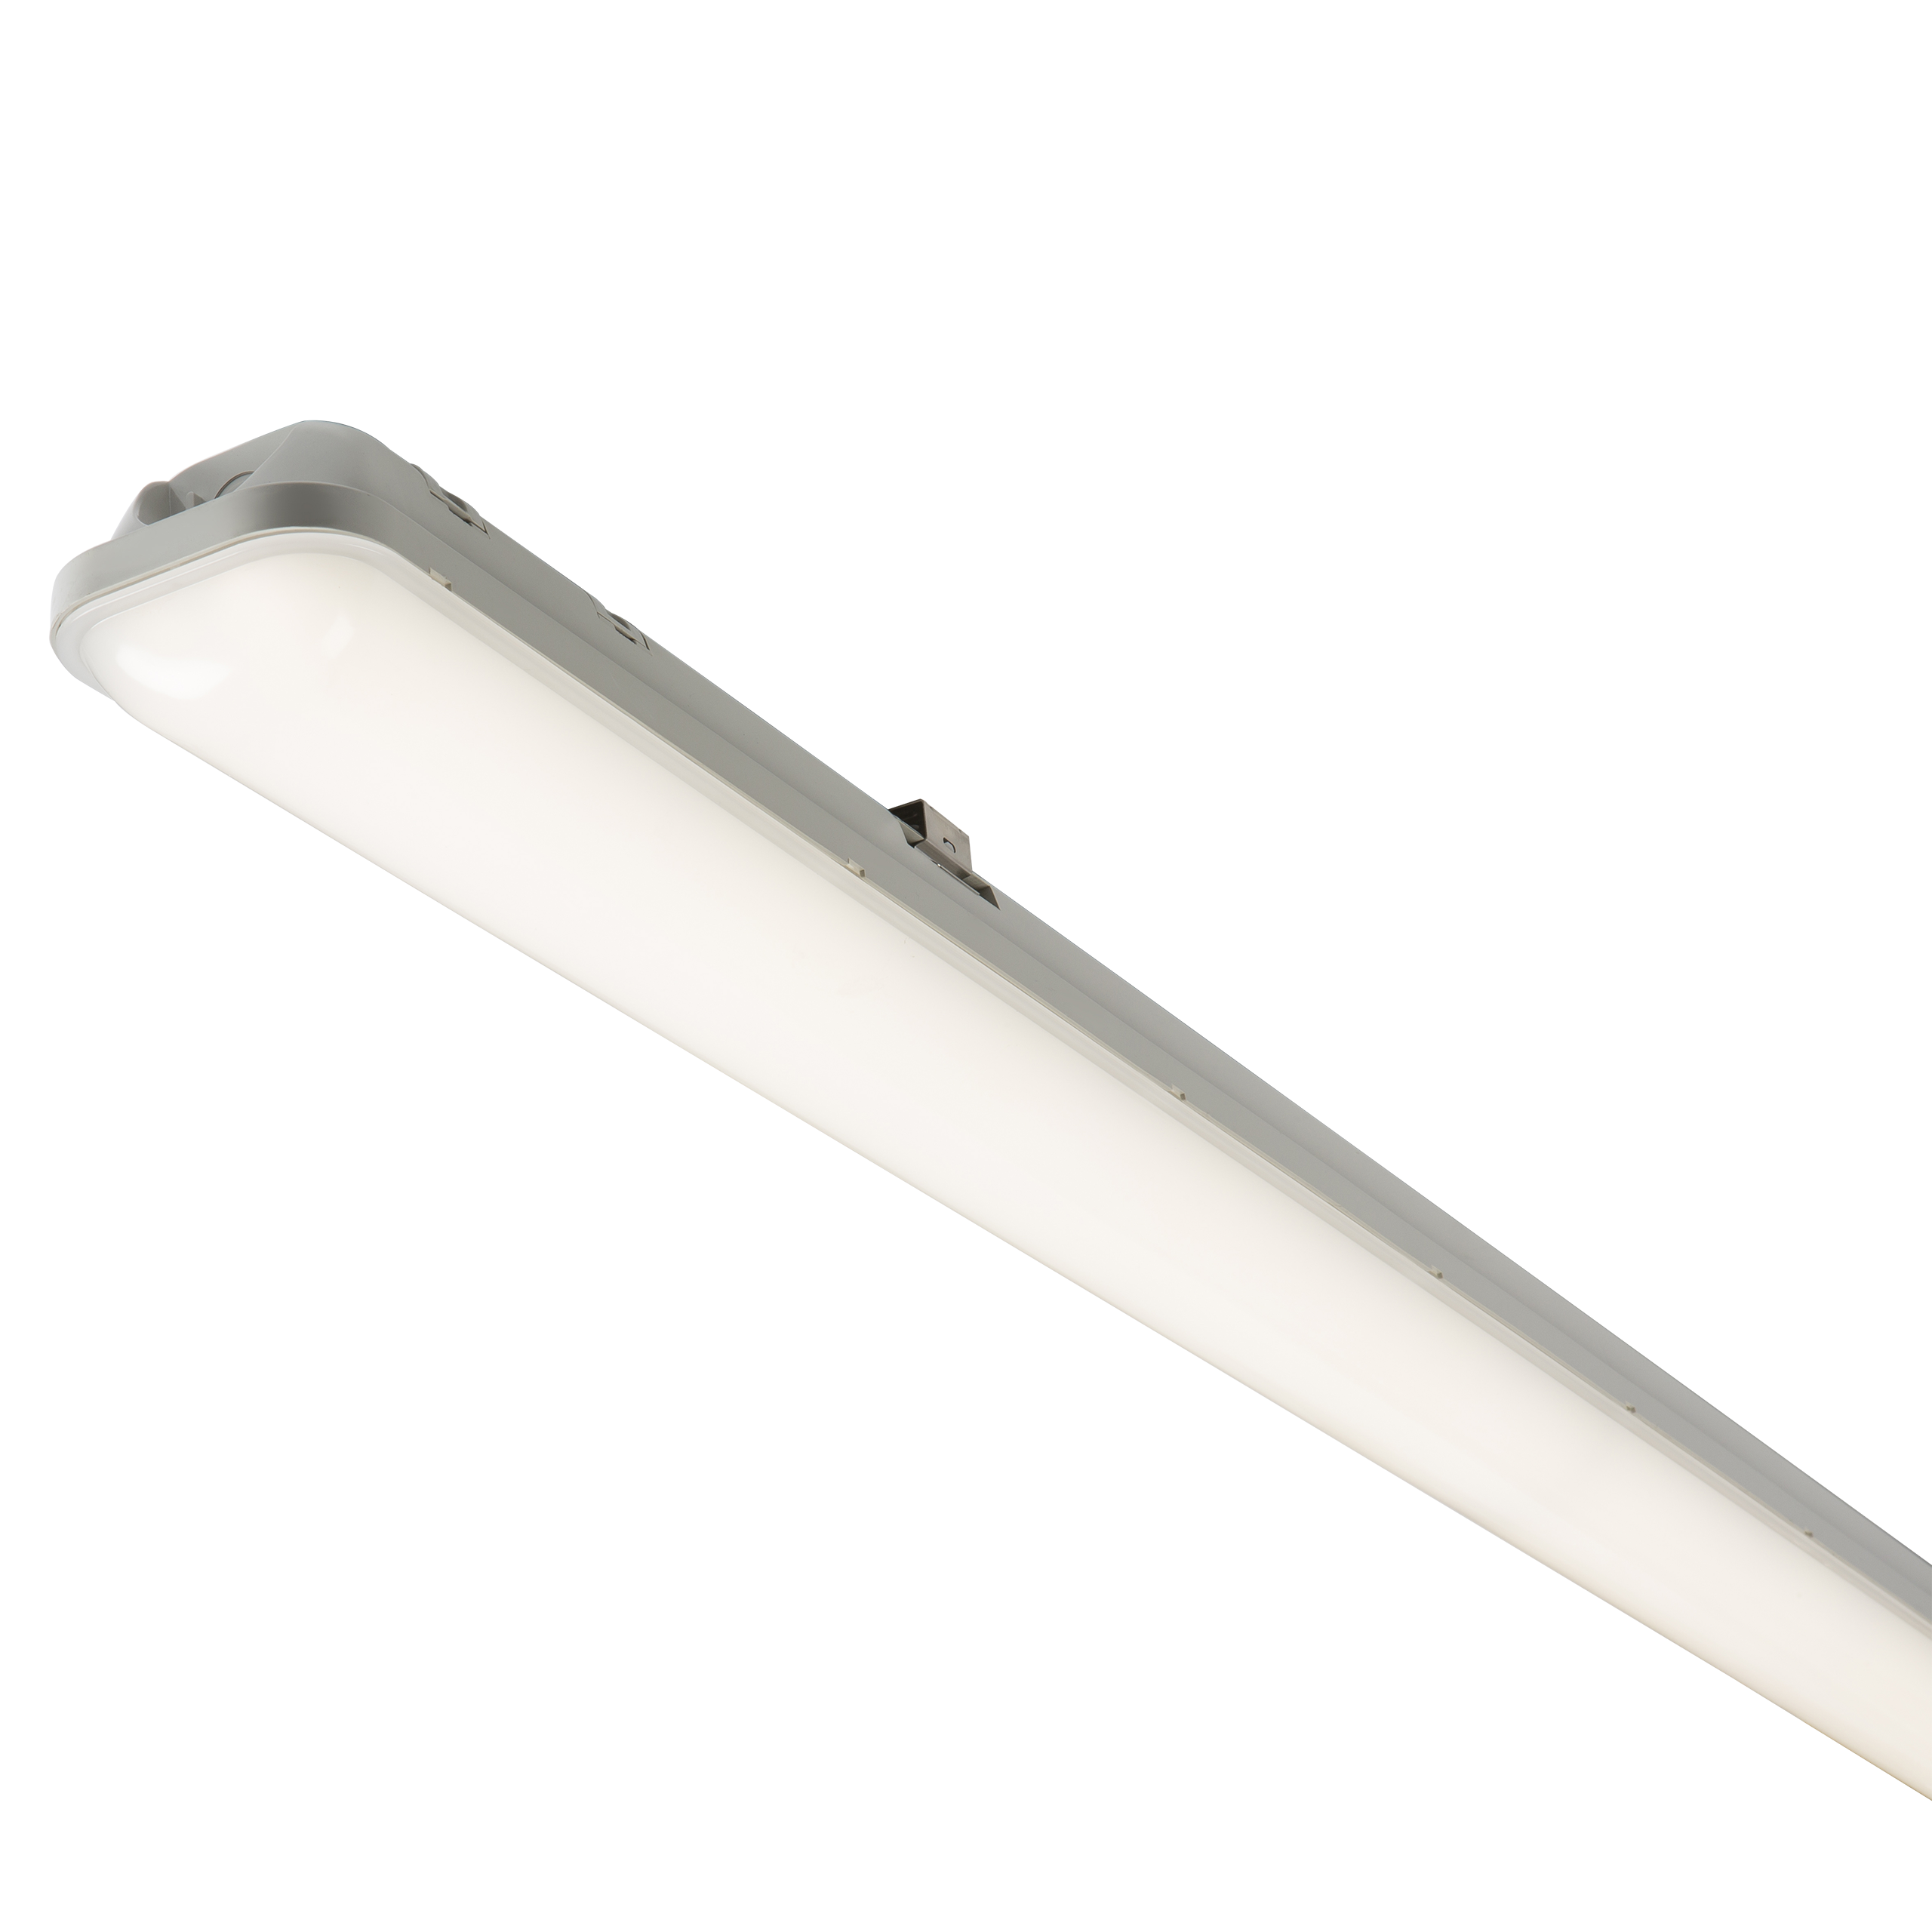 230V IP65 4ft 36W LED Non-Corrosive Fitting With Microwave Sensor - 1180mm - NCLED36S 